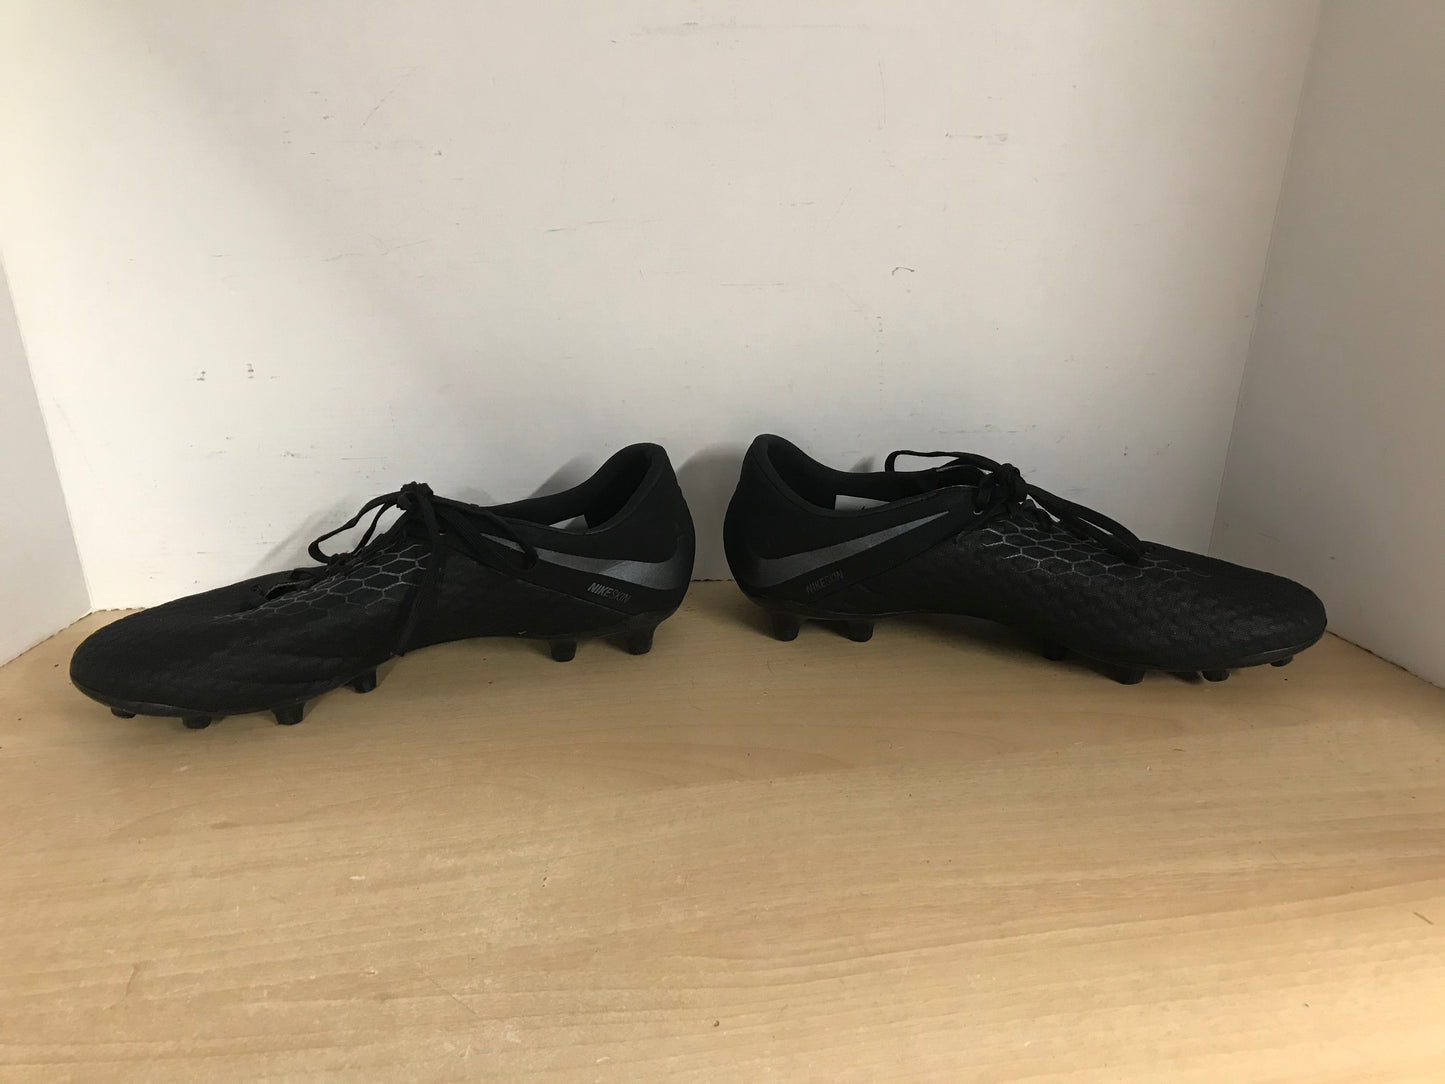 Soccer Shoes Cleats Men's Size 10.5 Nike Skins Black Excellent As New